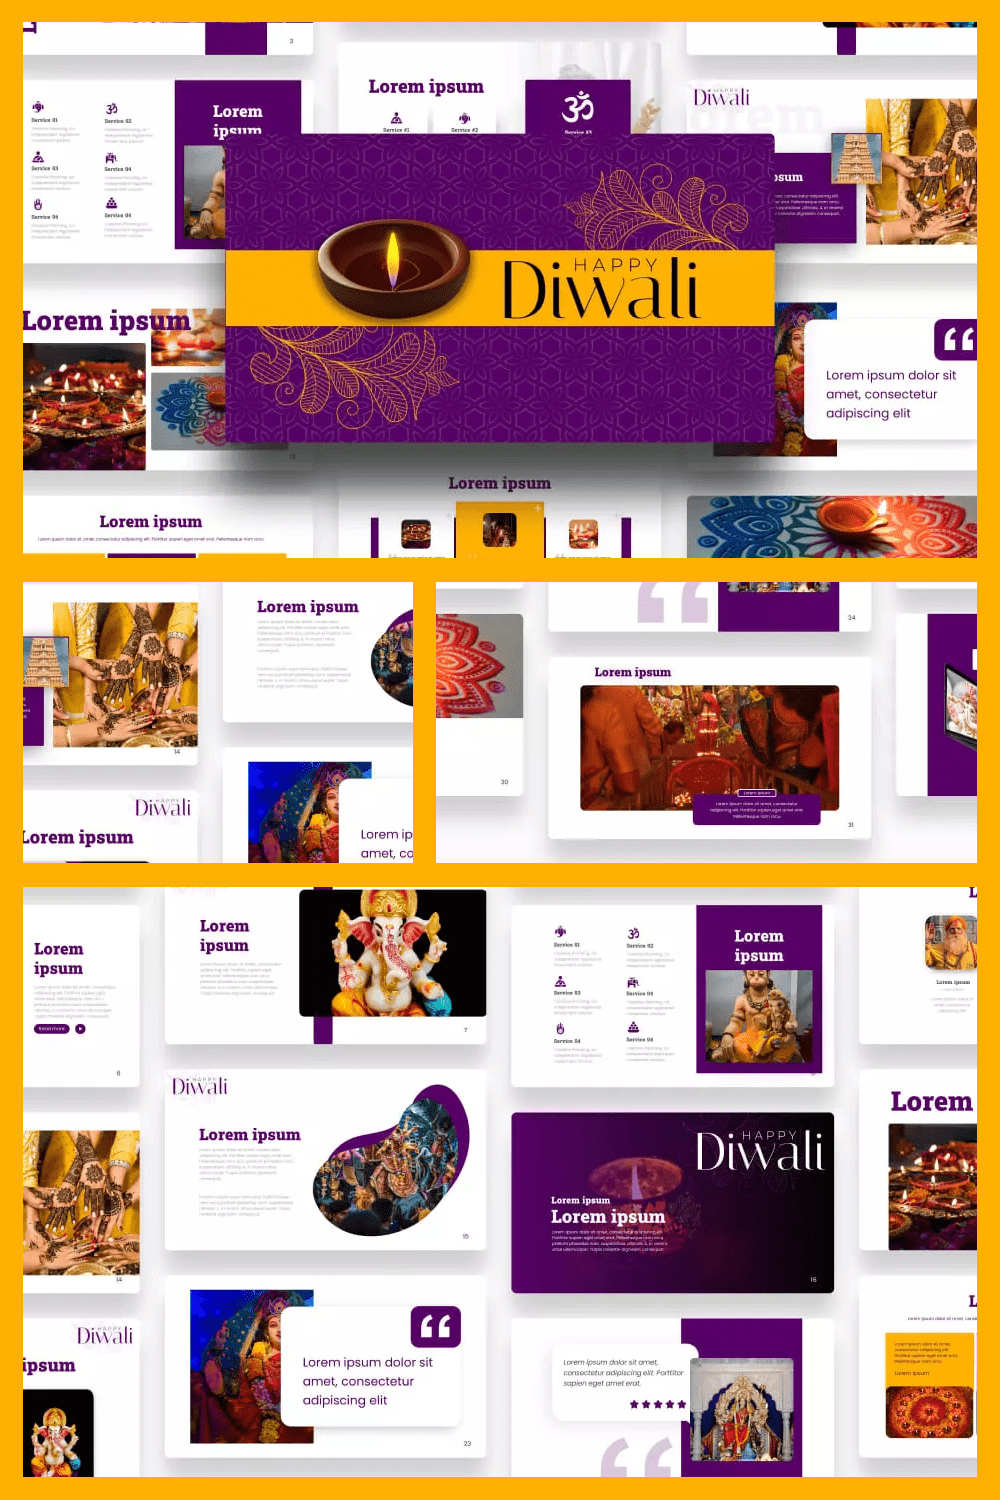 Collage of images in the style of India in purple, white and yellow tones.